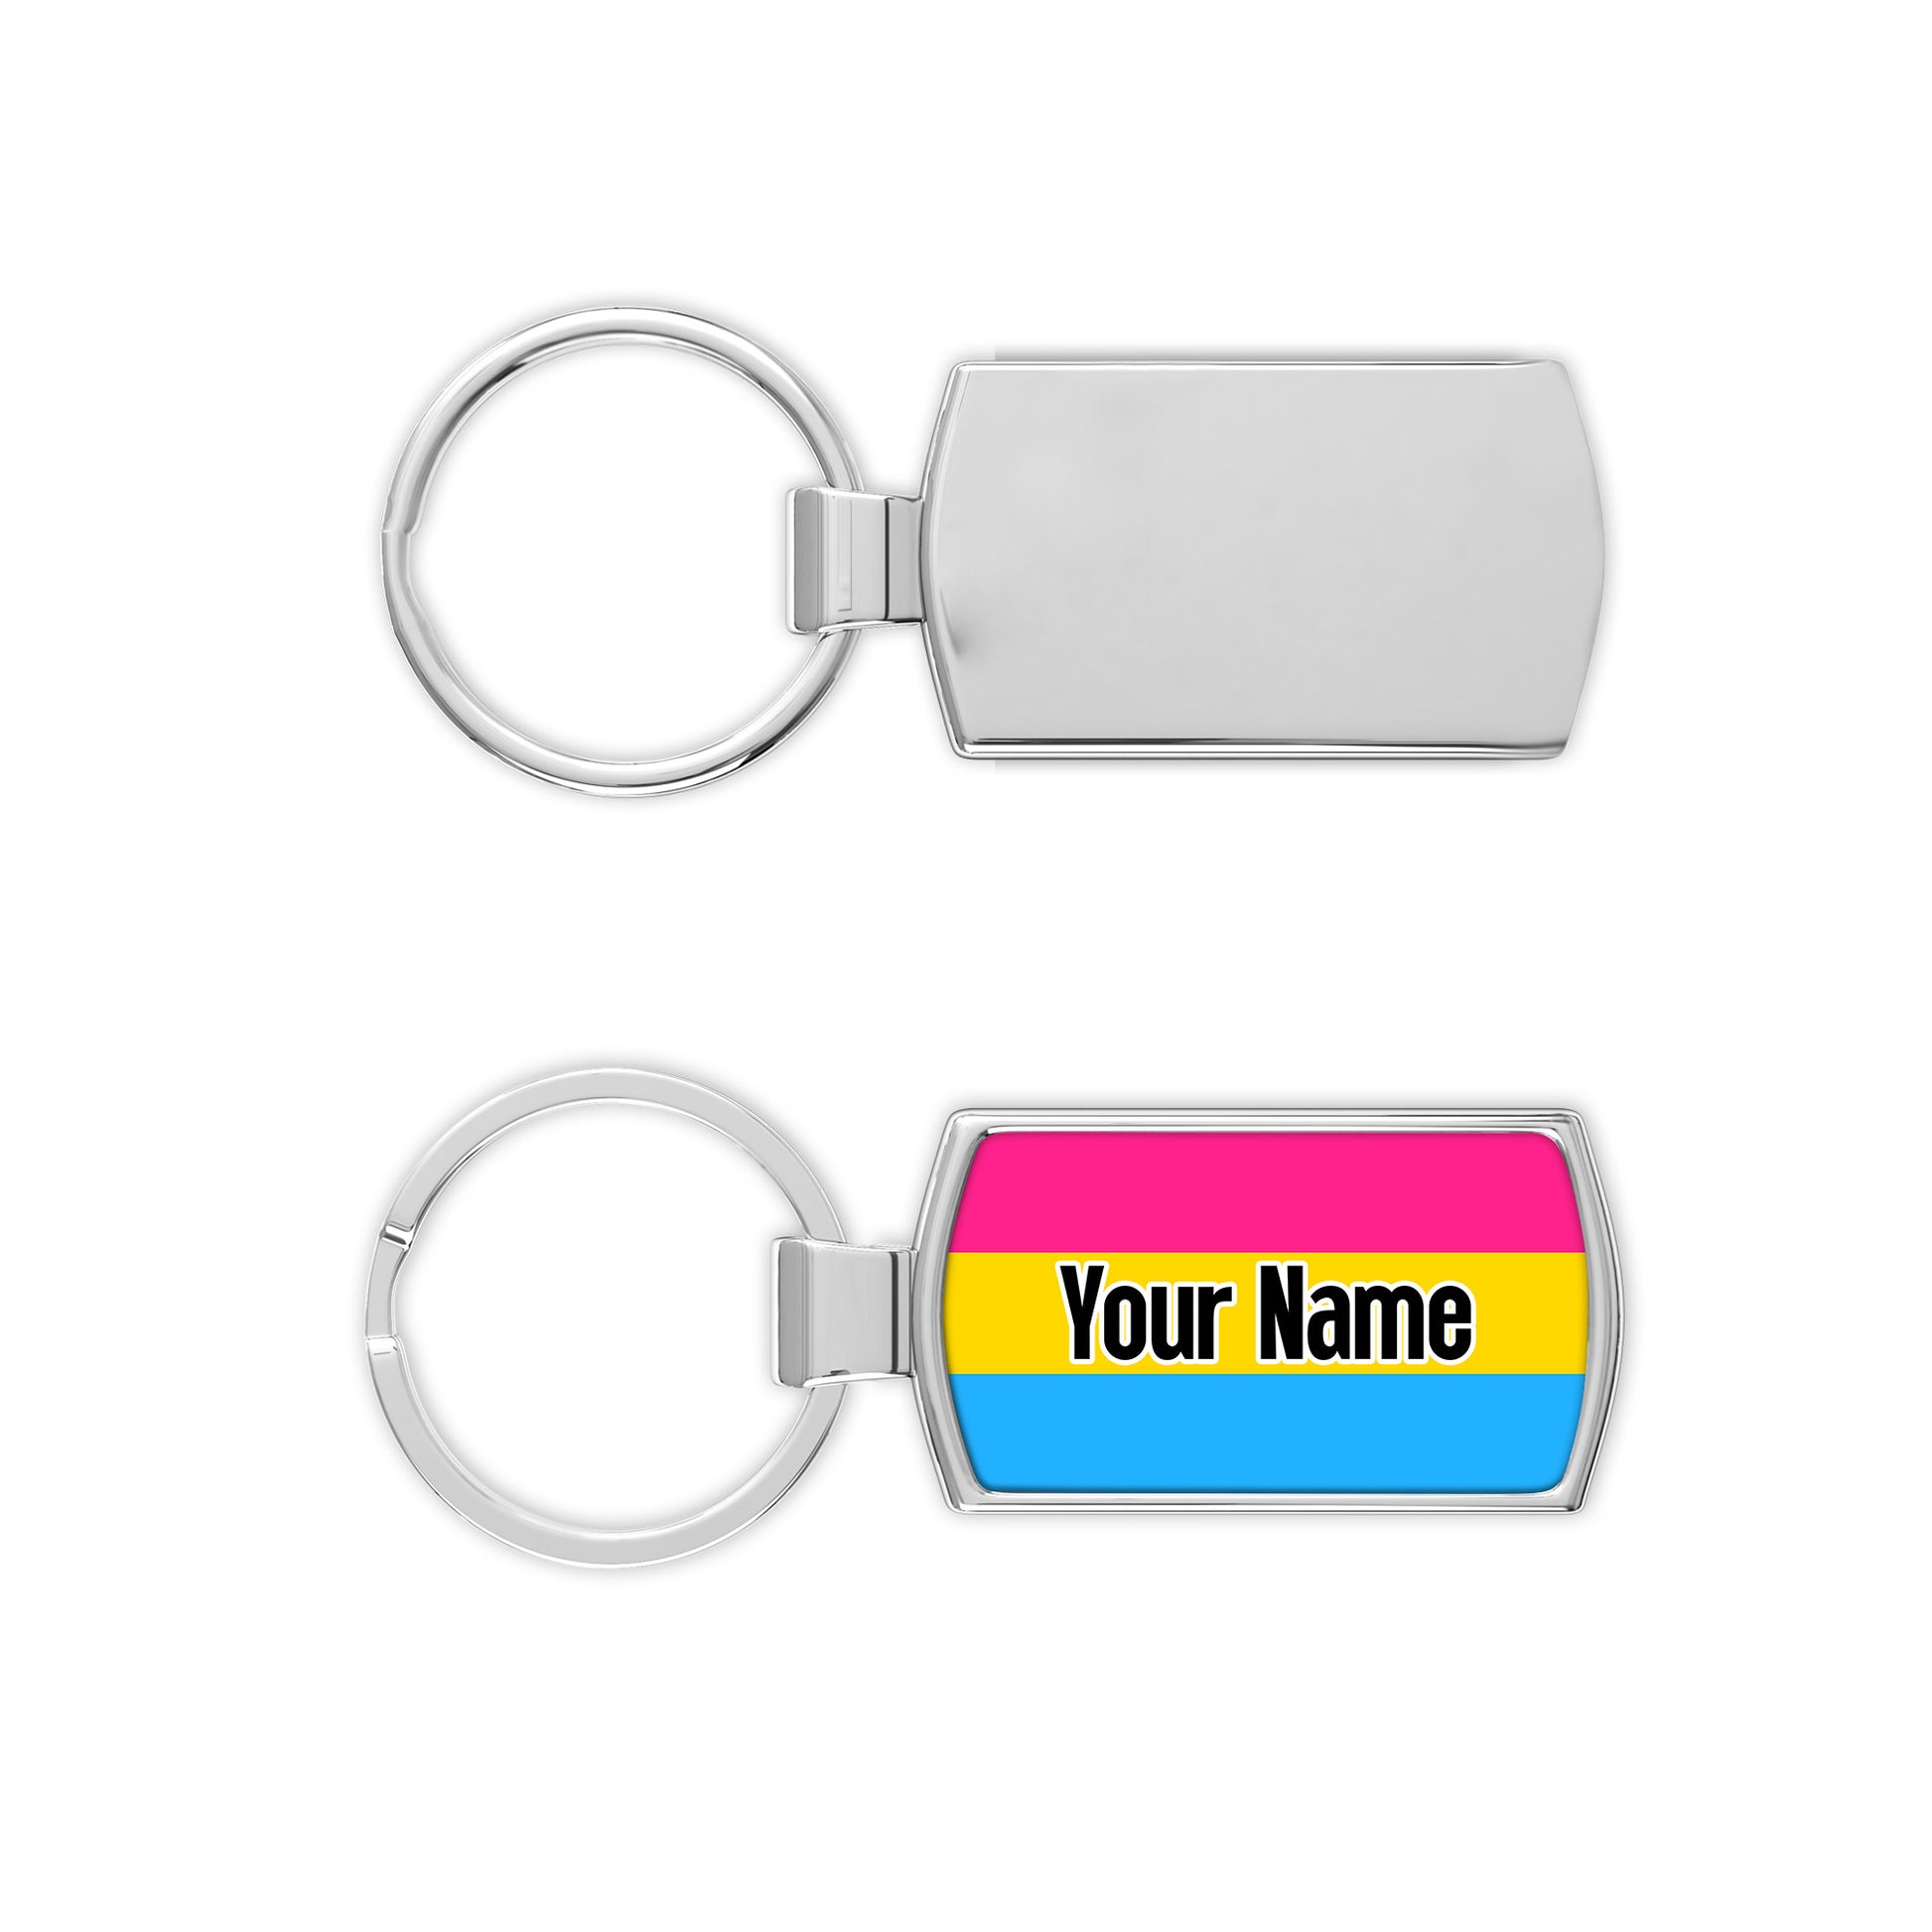 Pansexual pride flag metal keyring personalised with your name